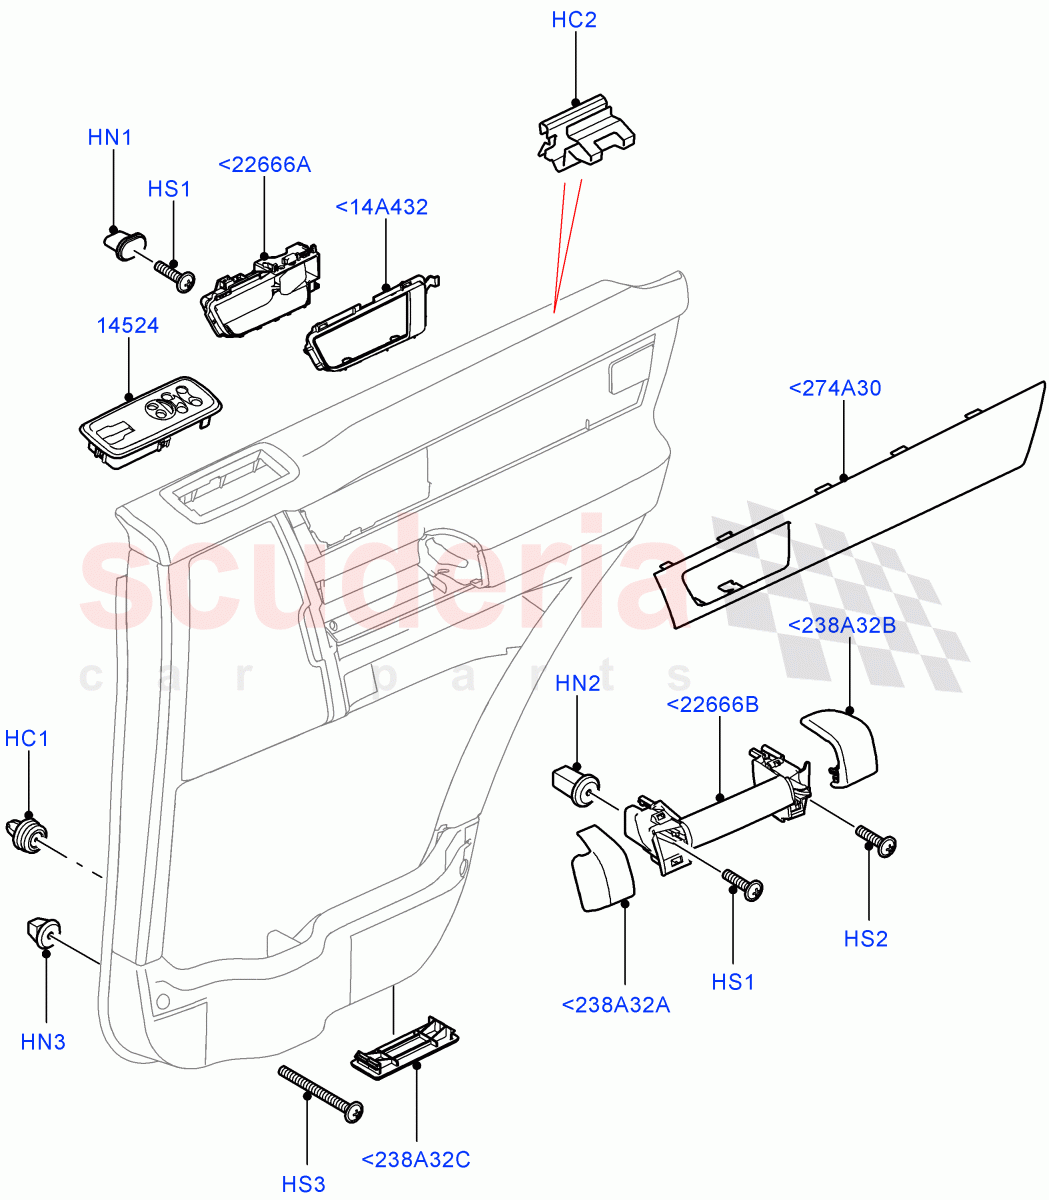 Rear Door Trim Installation((V)FROMAA000001) of Land Rover Land Rover Discovery 4 (2010-2016) [2.7 Diesel V6]